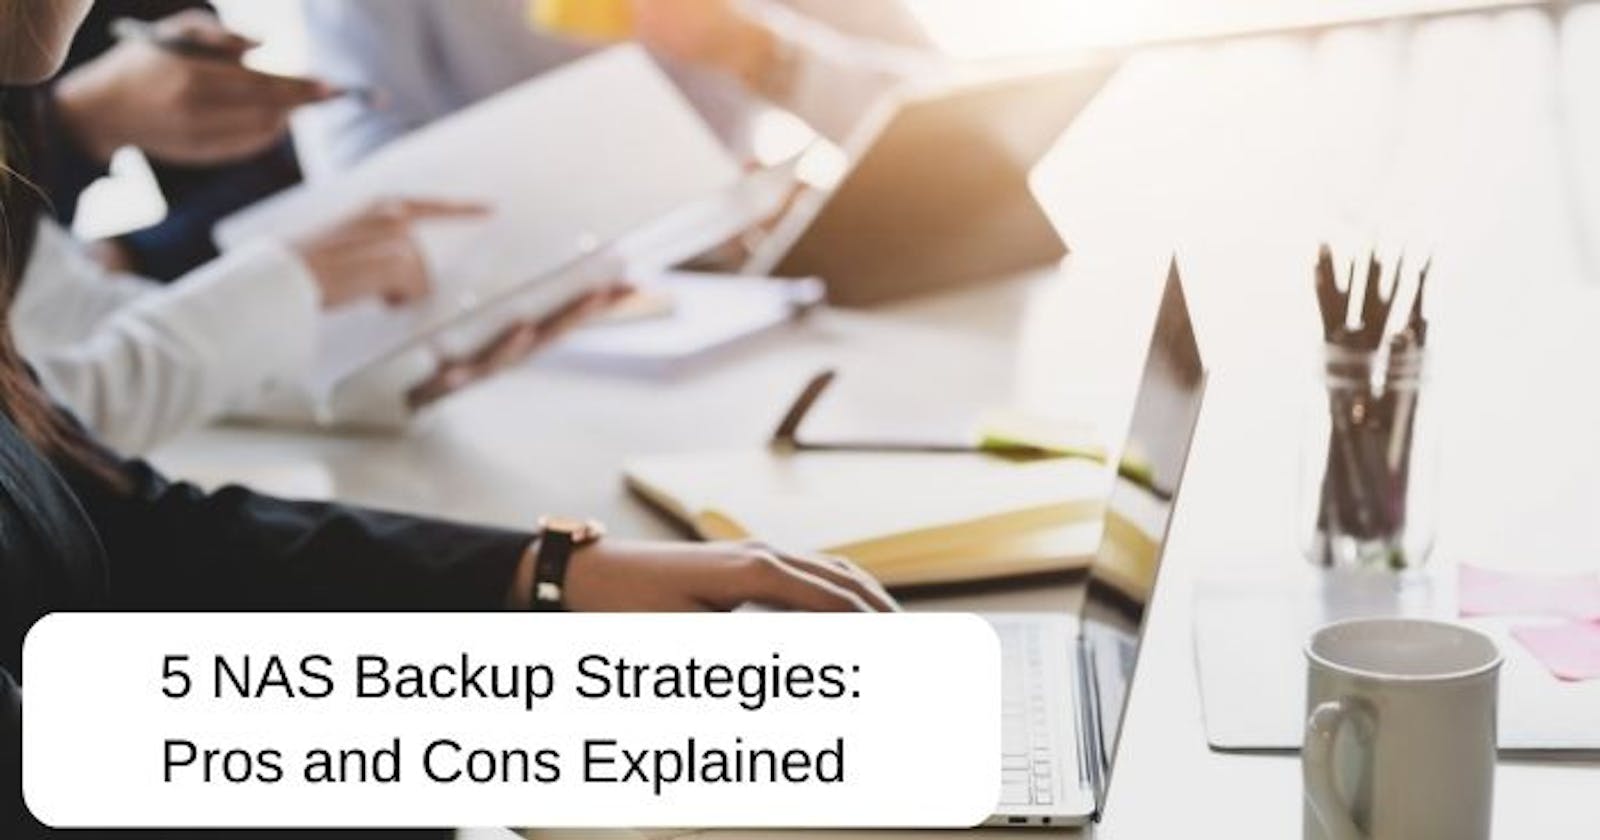 5 NAS Backup Strategies: Pros and Cons Explained